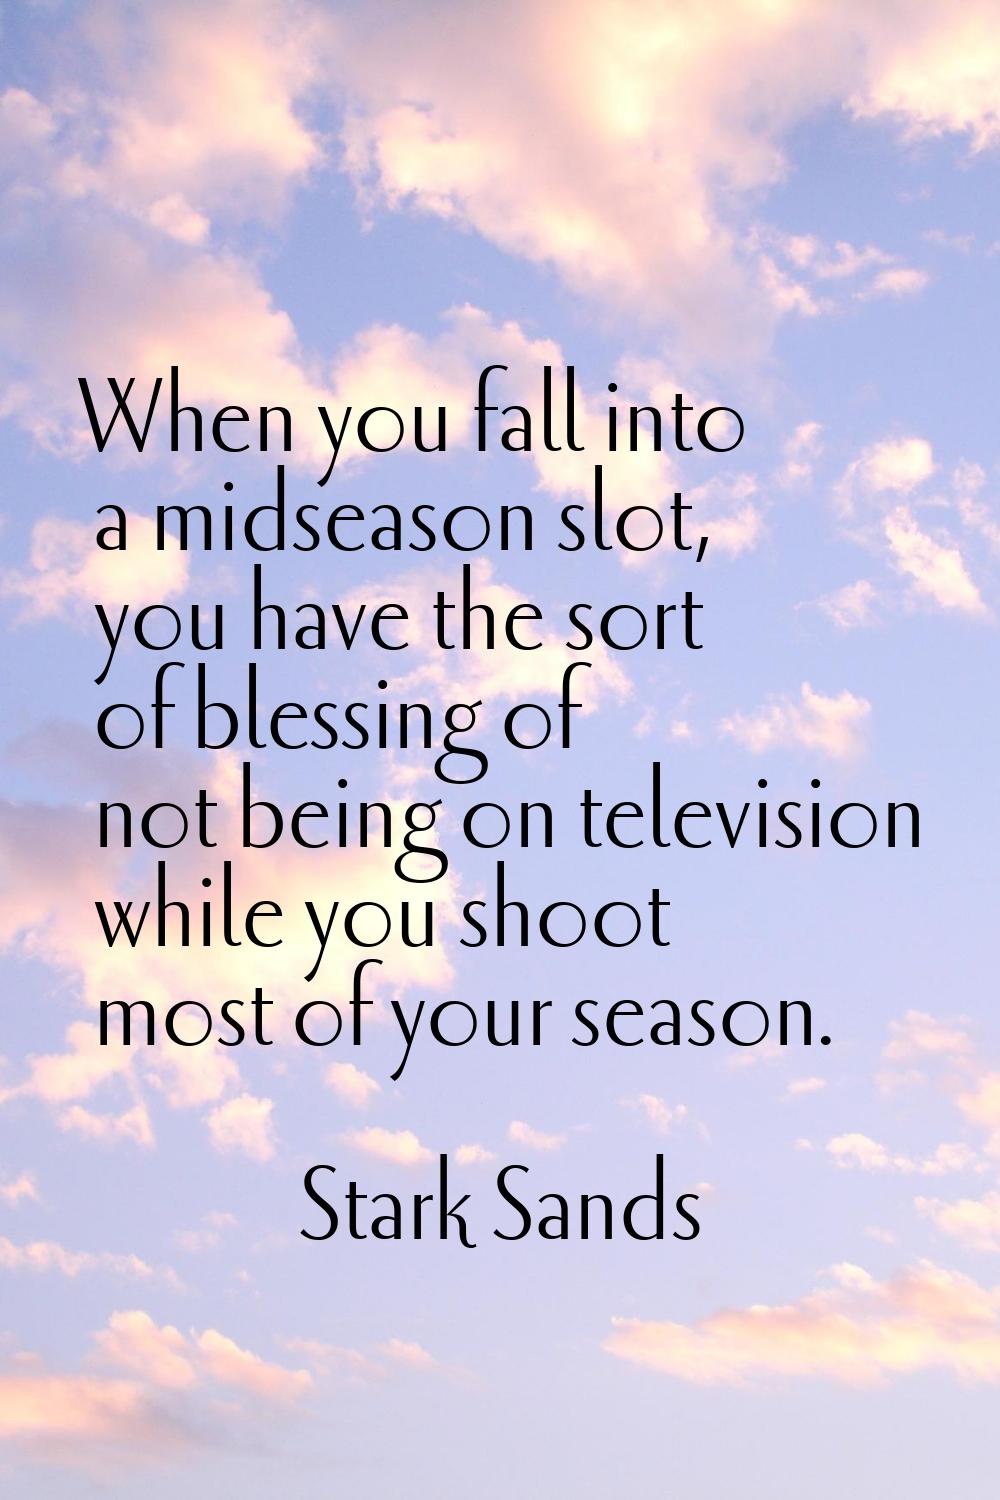 When you fall into a midseason slot, you have the sort of blessing of not being on television while